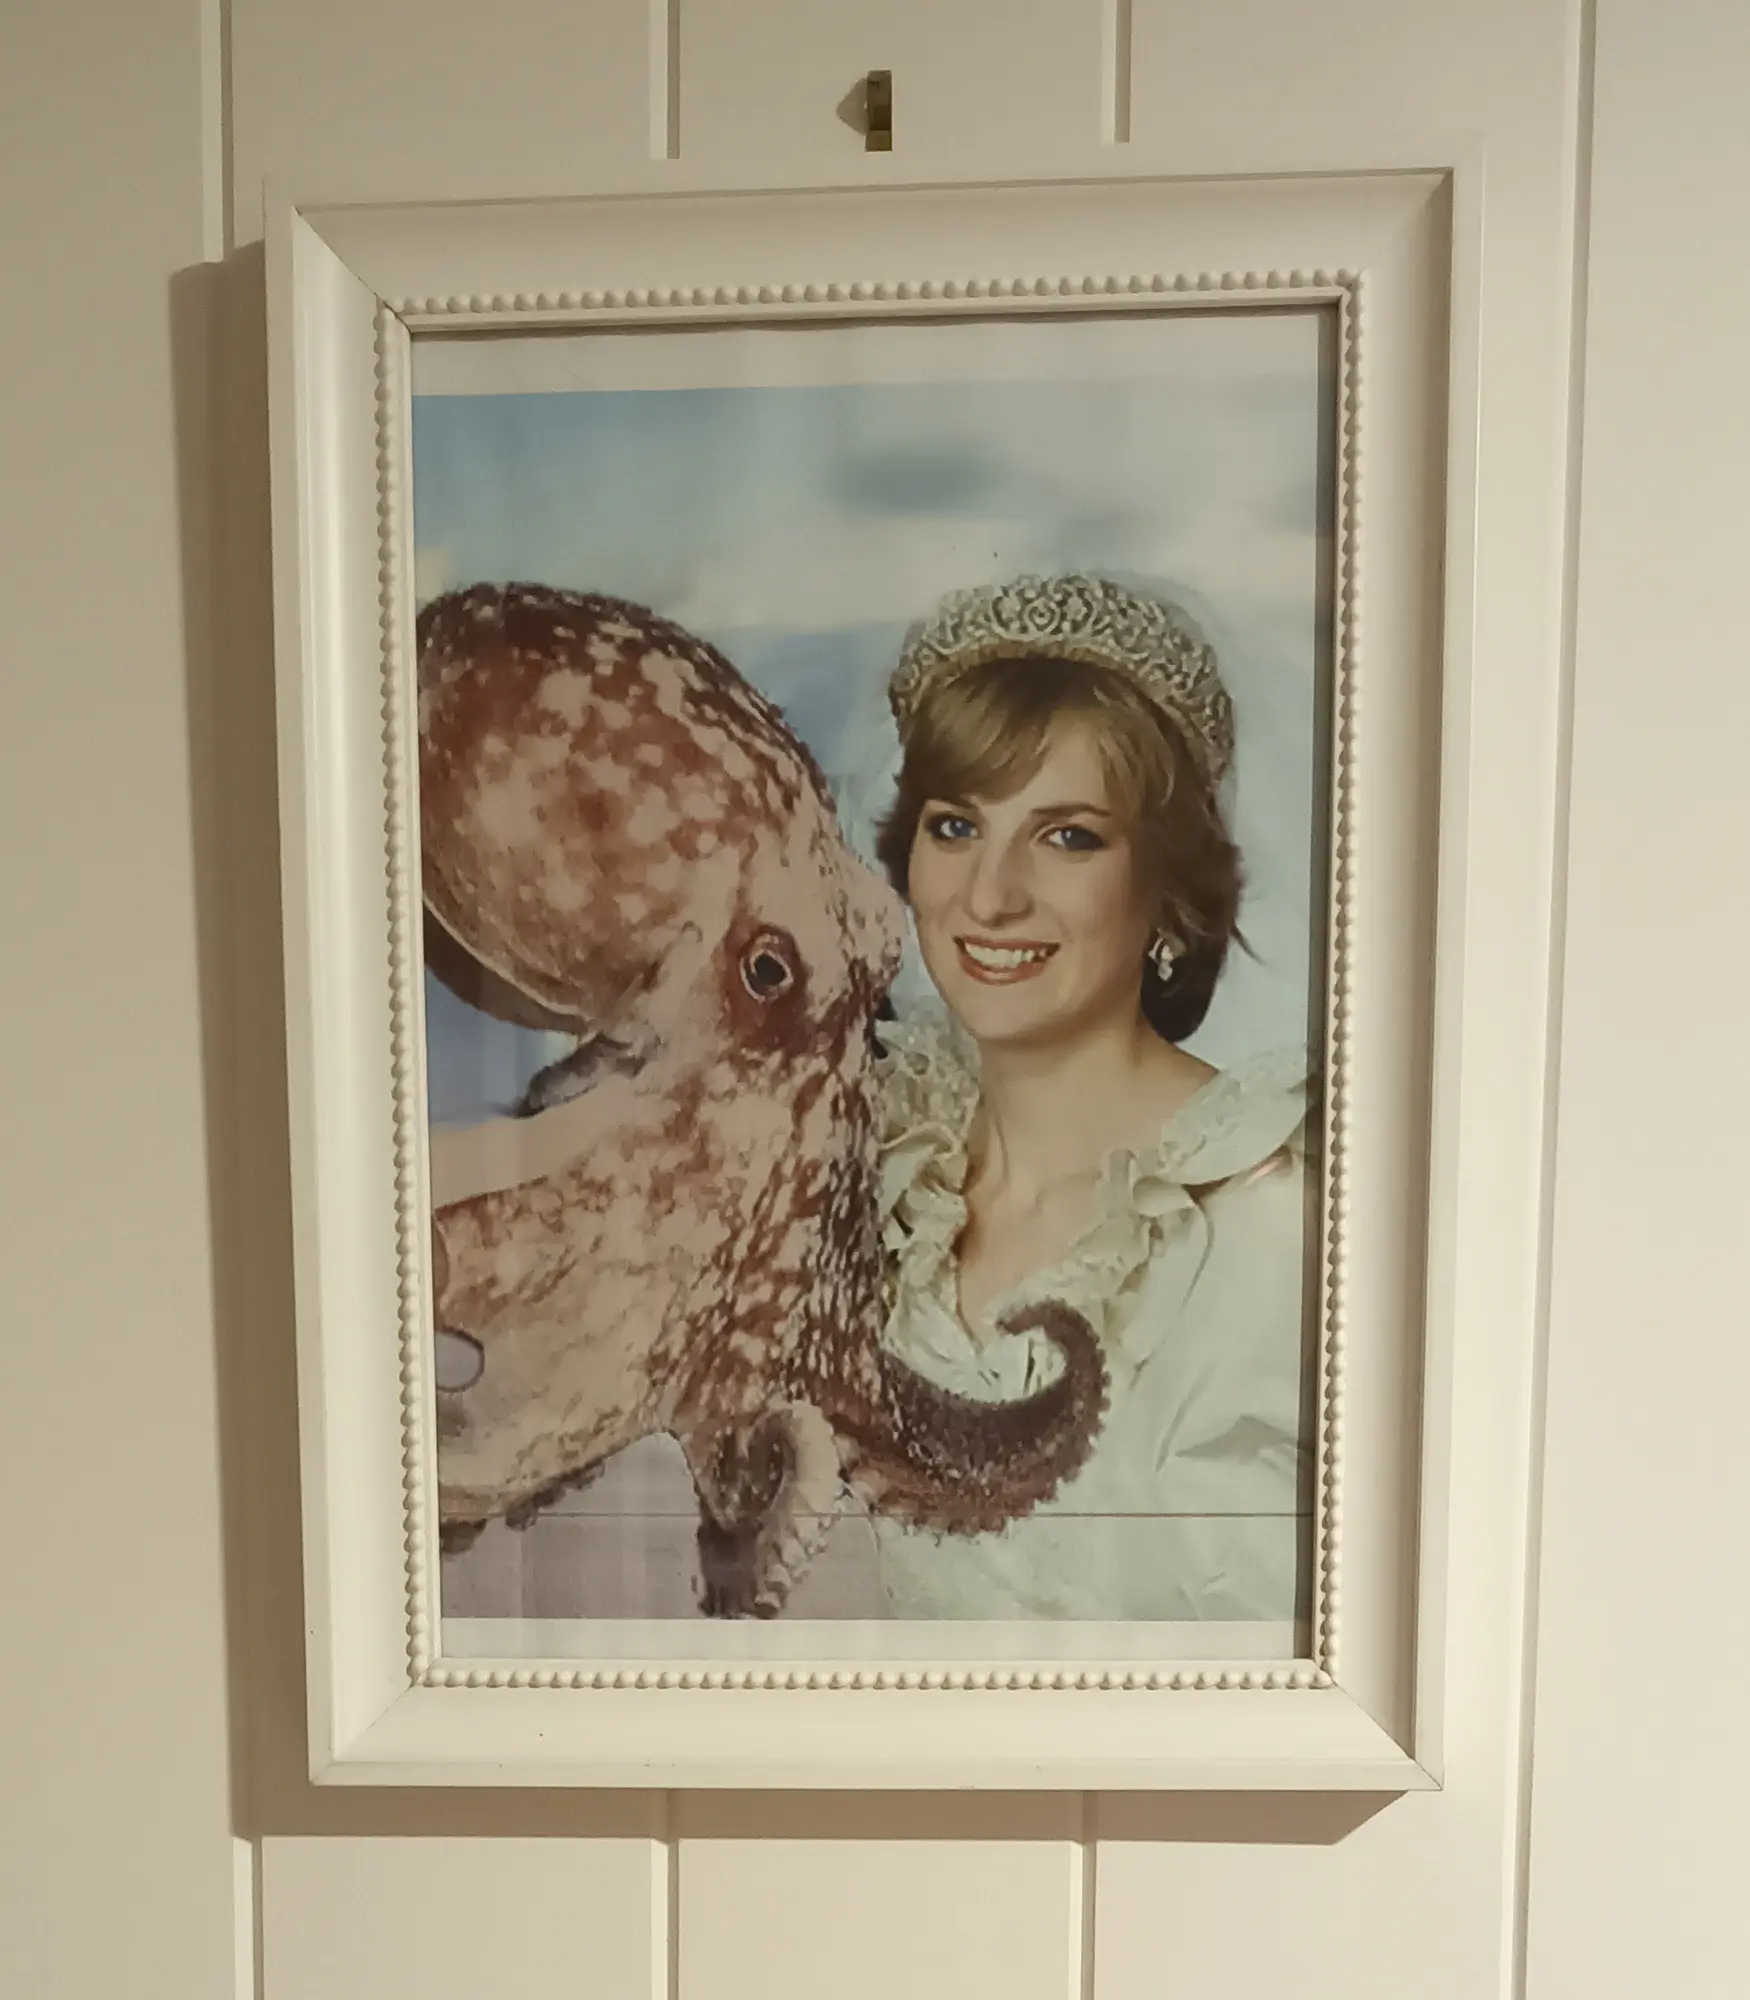 A wedding photo in a frame on a wall; it is Princess Diana marrying an octopus